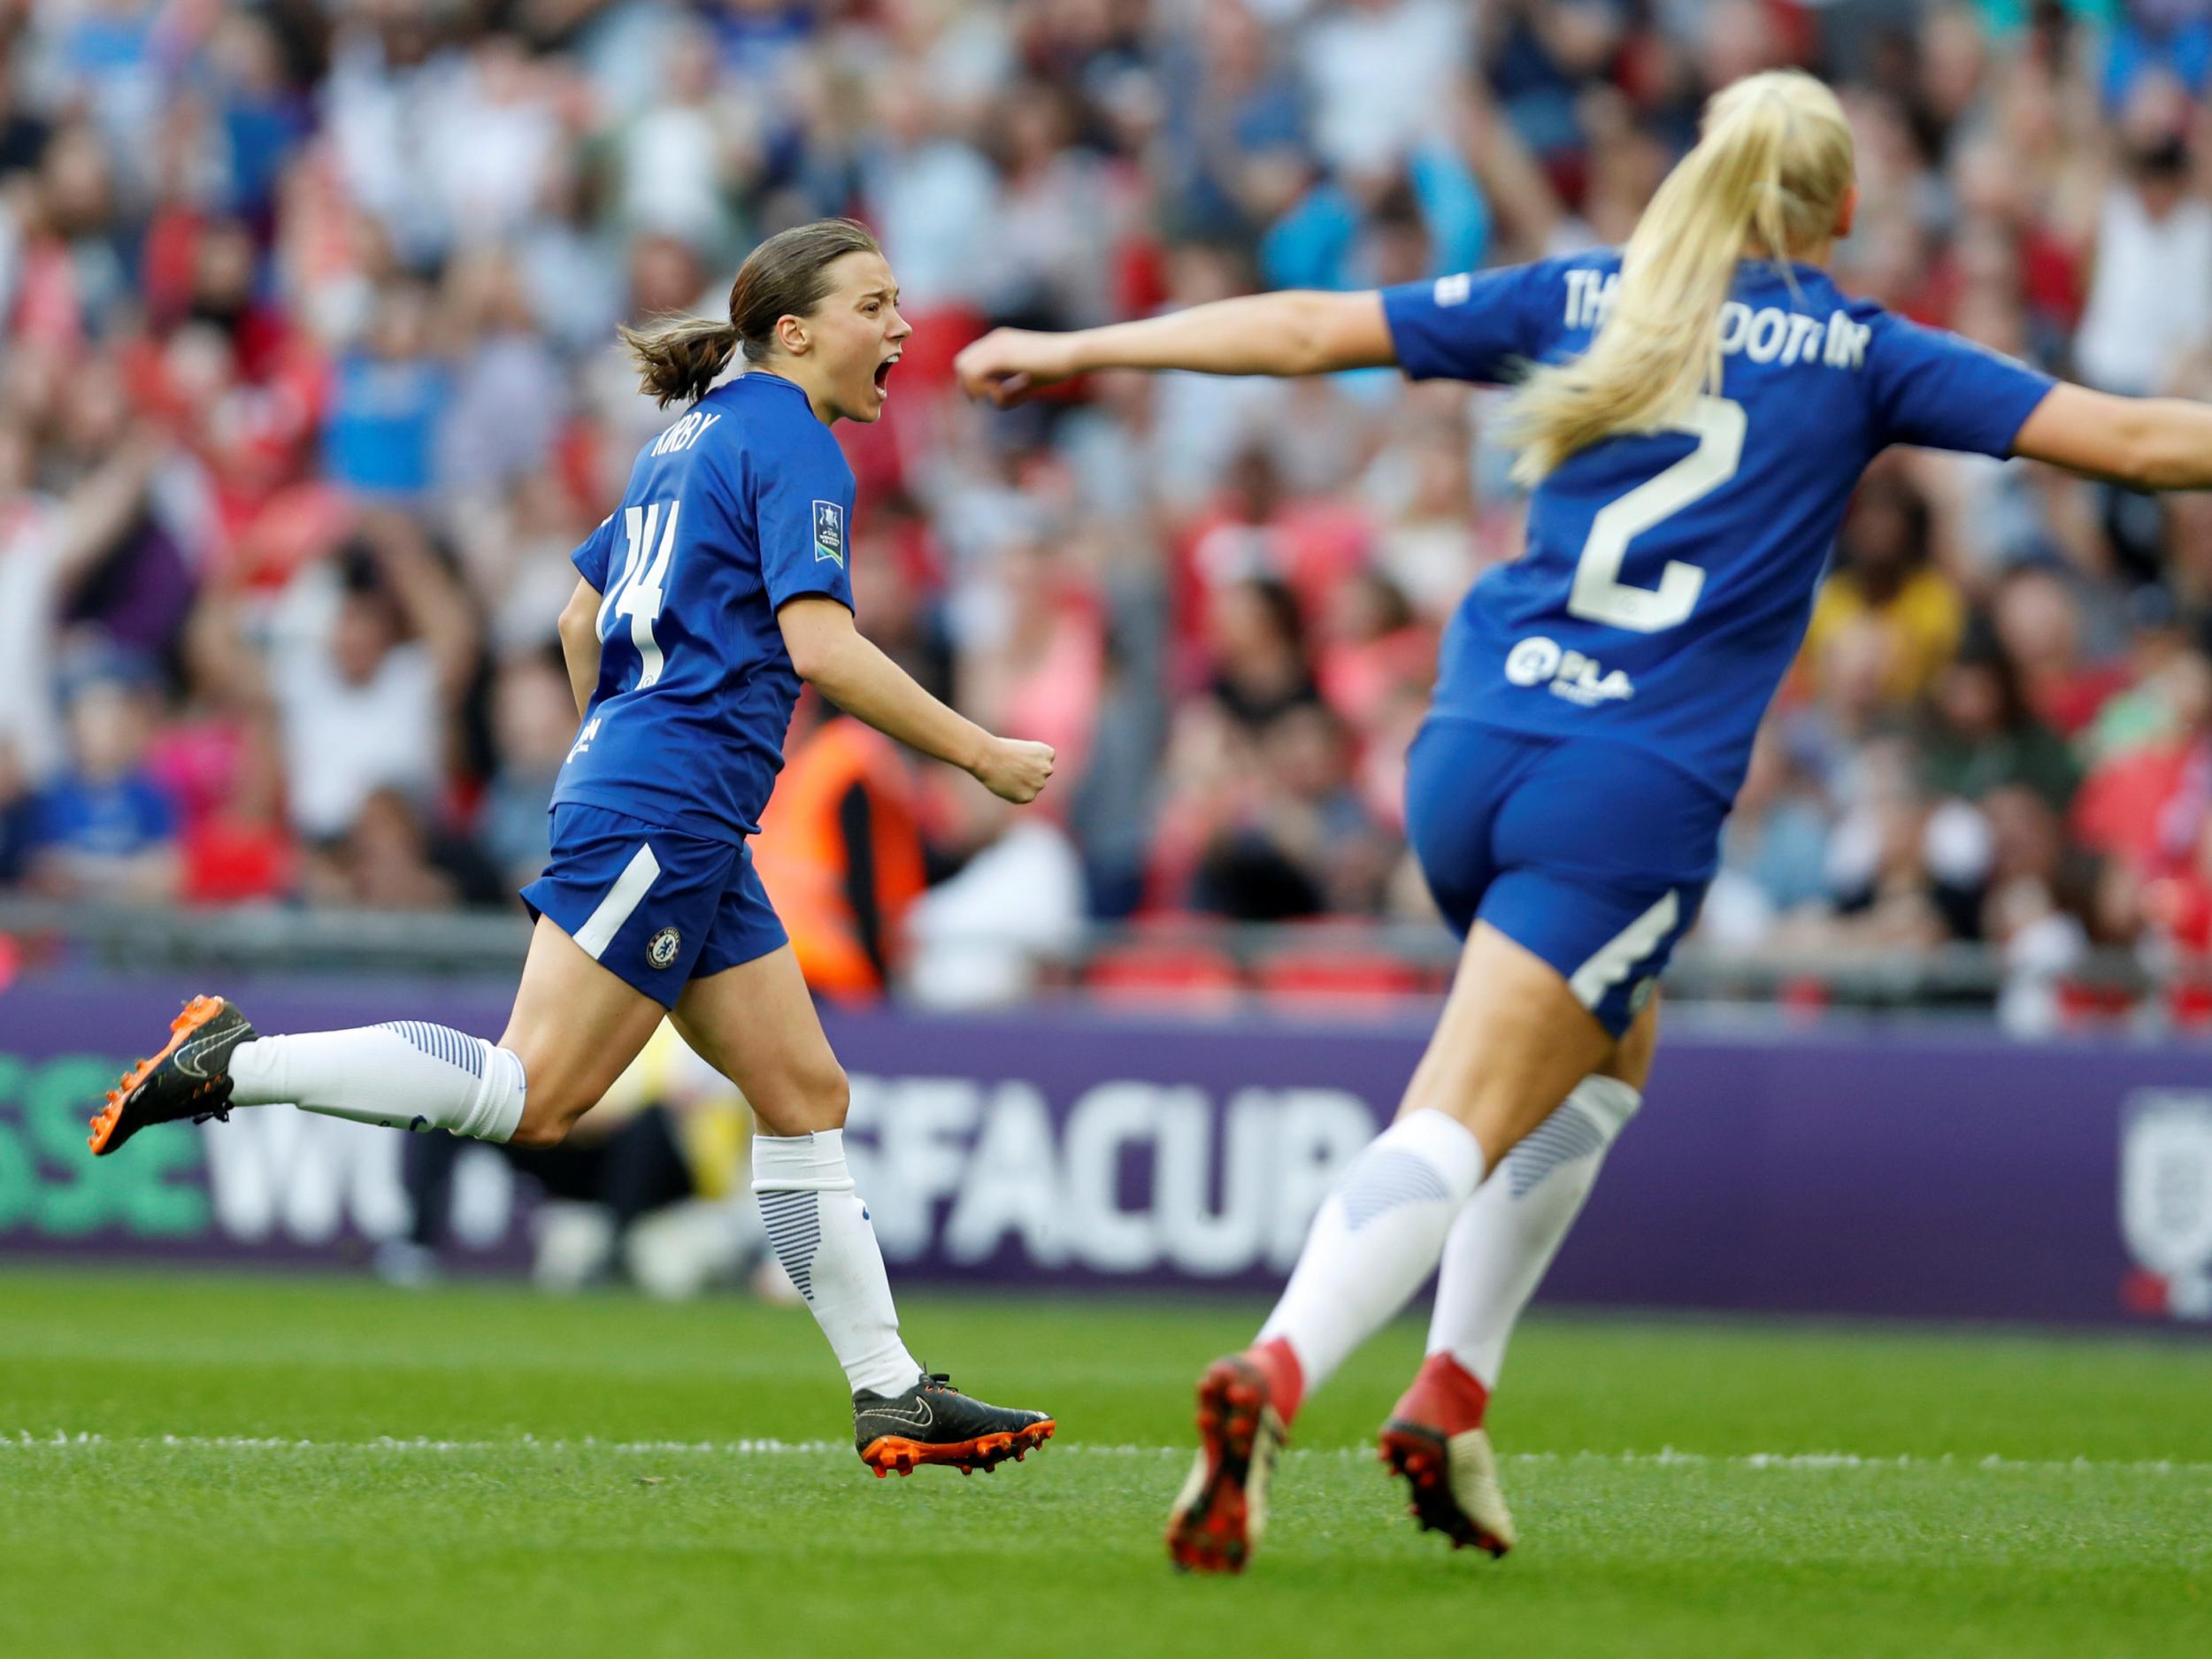 Fran Kirby scored Chelsea's third to kill off the game